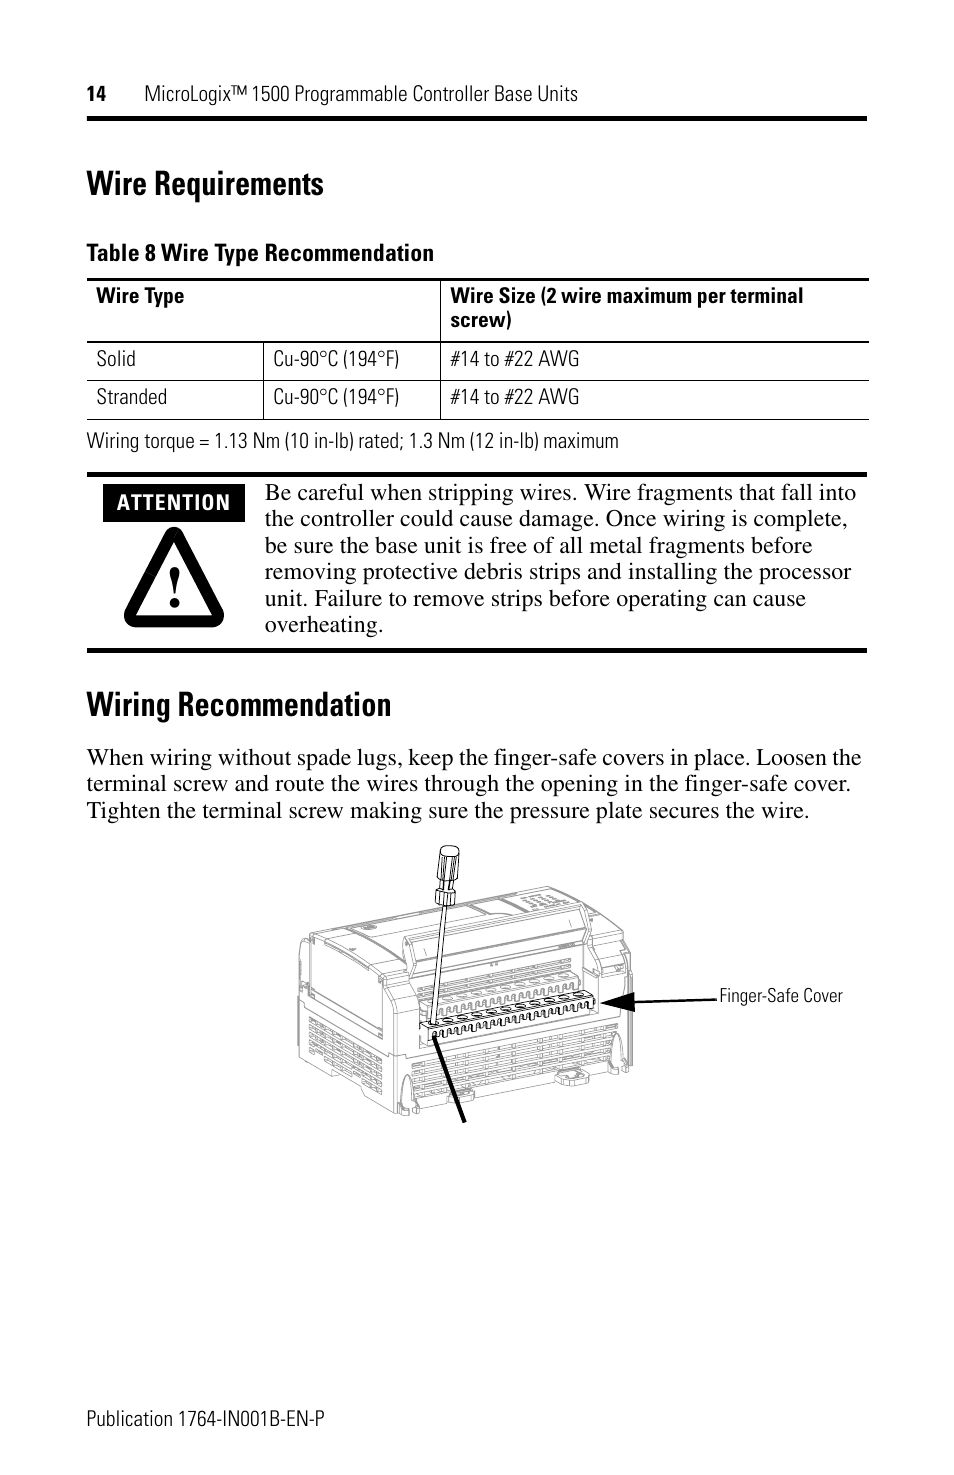 Wire requirements, Wiring recommendation | Rockwell Automation 1764-28BXB MicroLogix 1500 Programmable Controller Base Units User Manual | Page 14 / 27